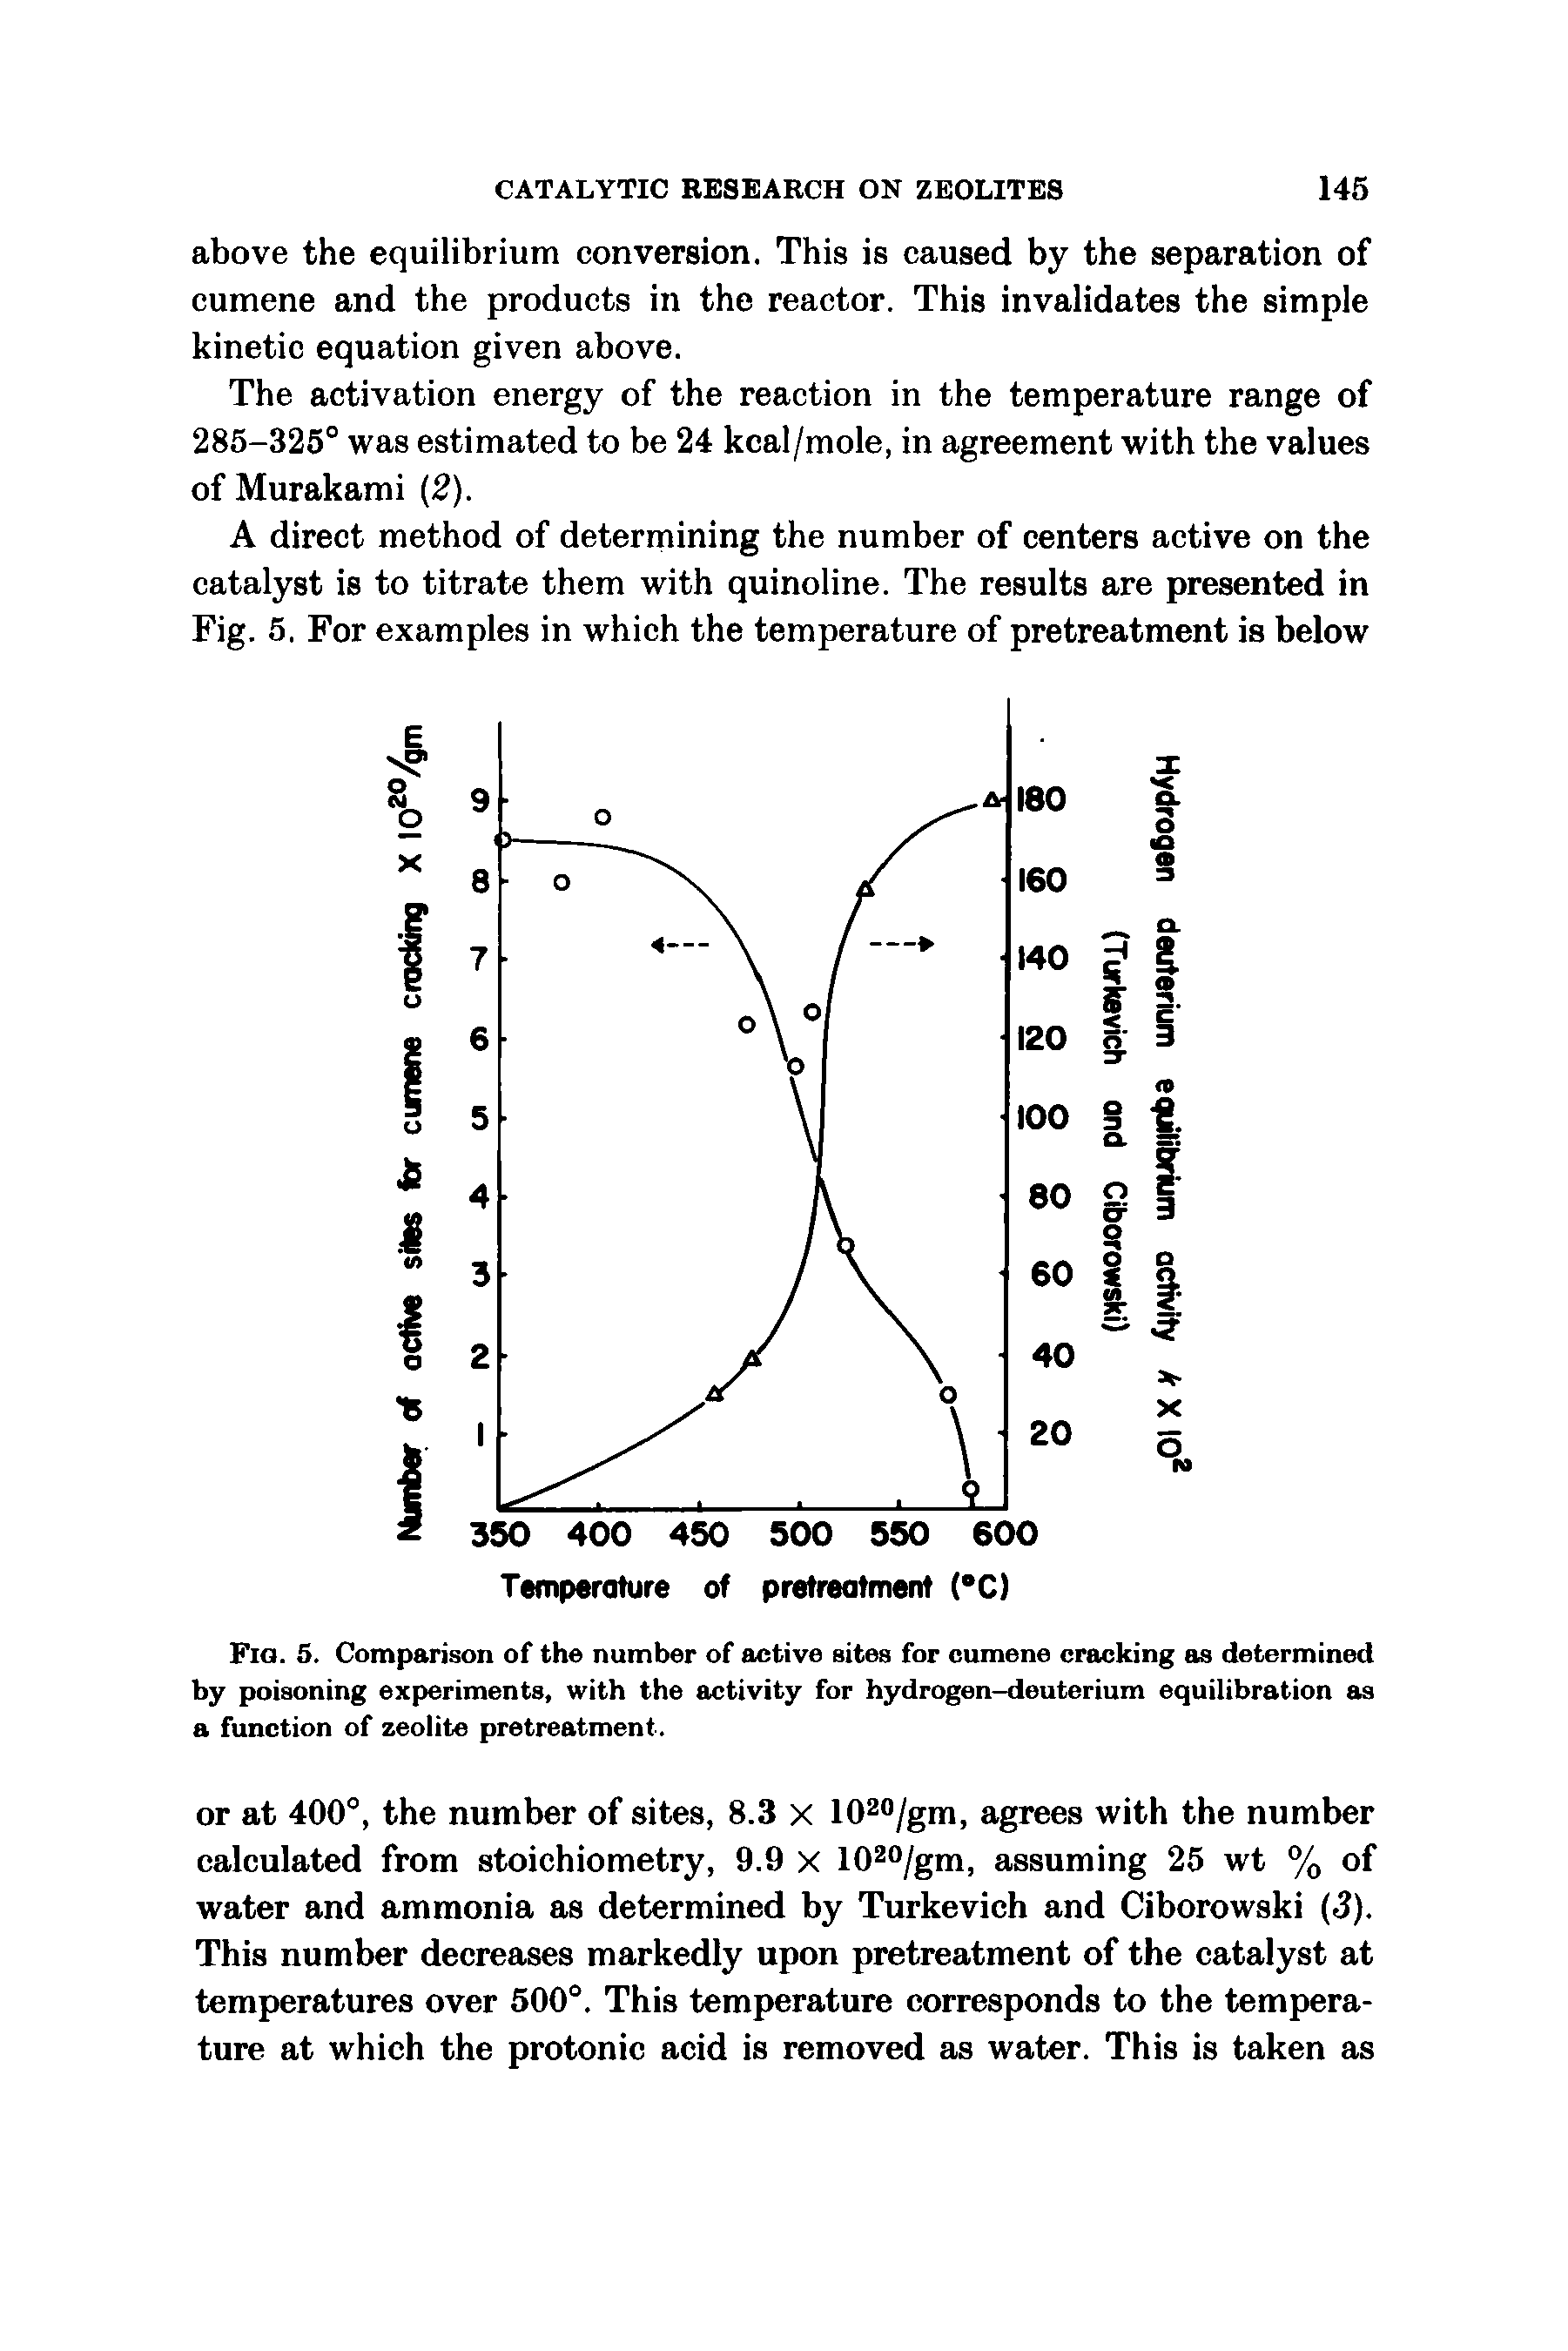 Fig. 5. Comparison of the number of active sites for cumene cracking as determined by poisoning experiments, with the activity for hydrogen-deuterium equilibration as a function of zeolite pretreatment.